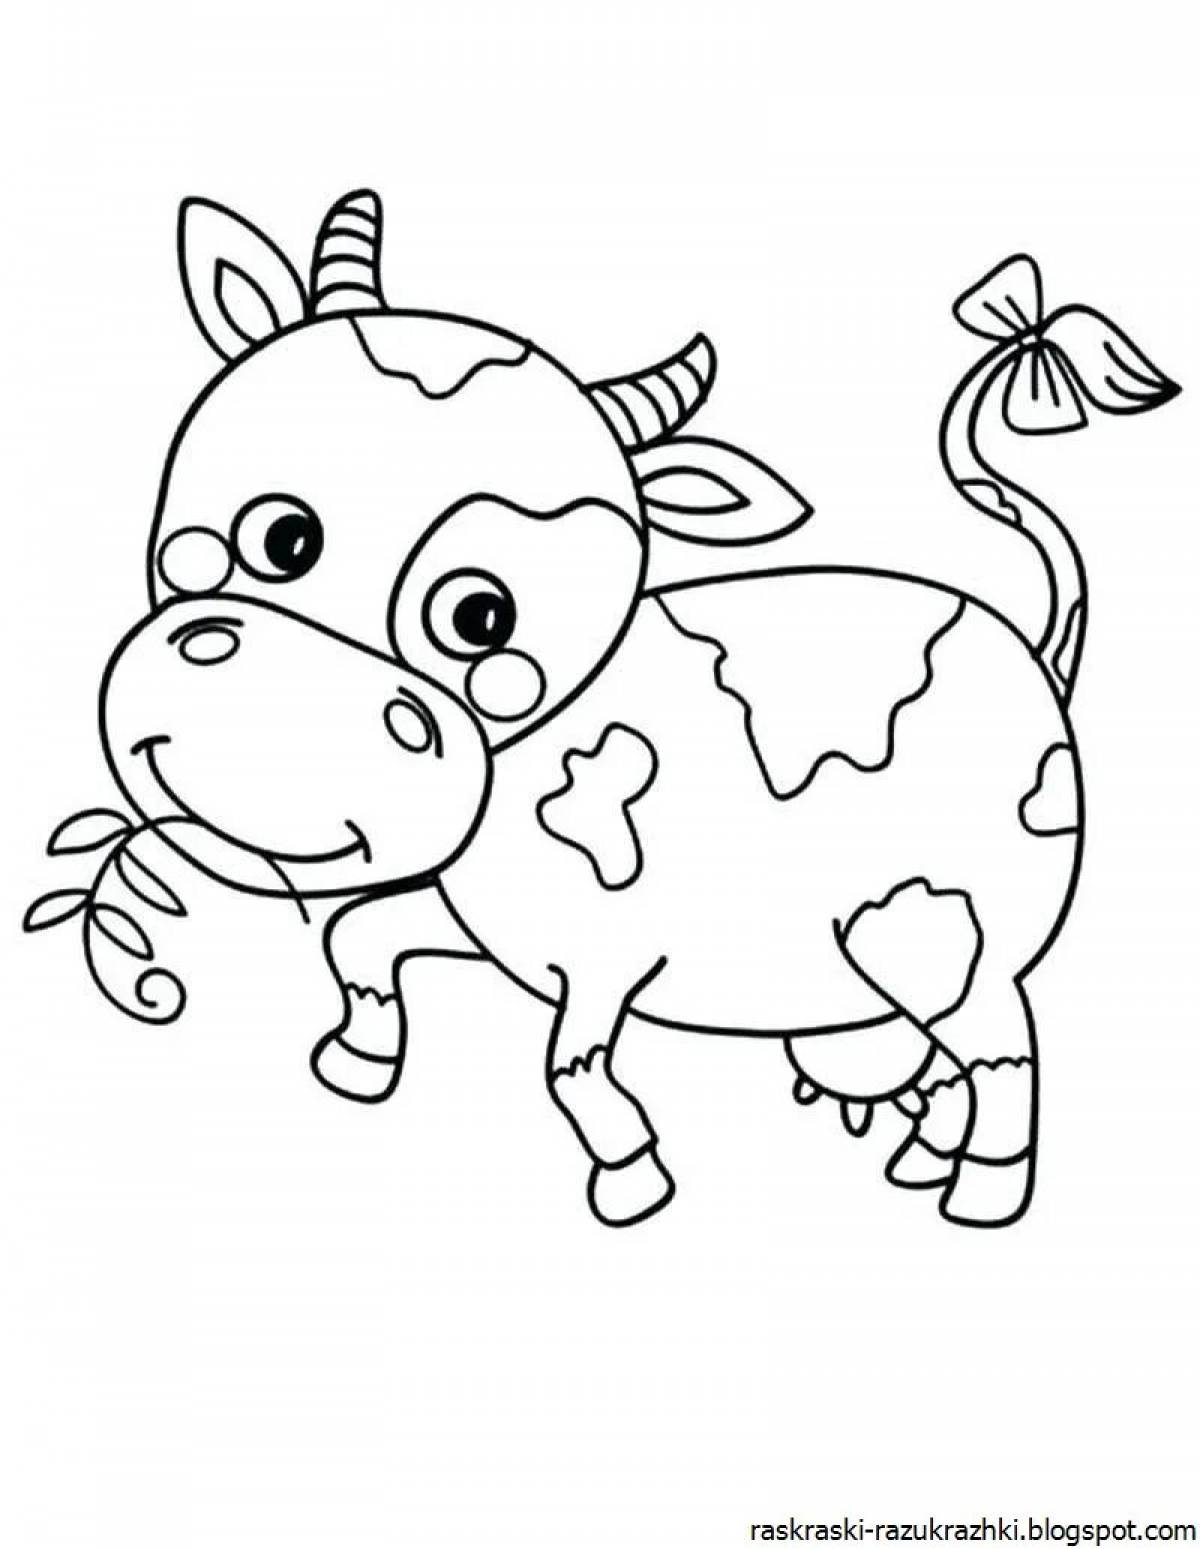 Drawing cow for kids #5